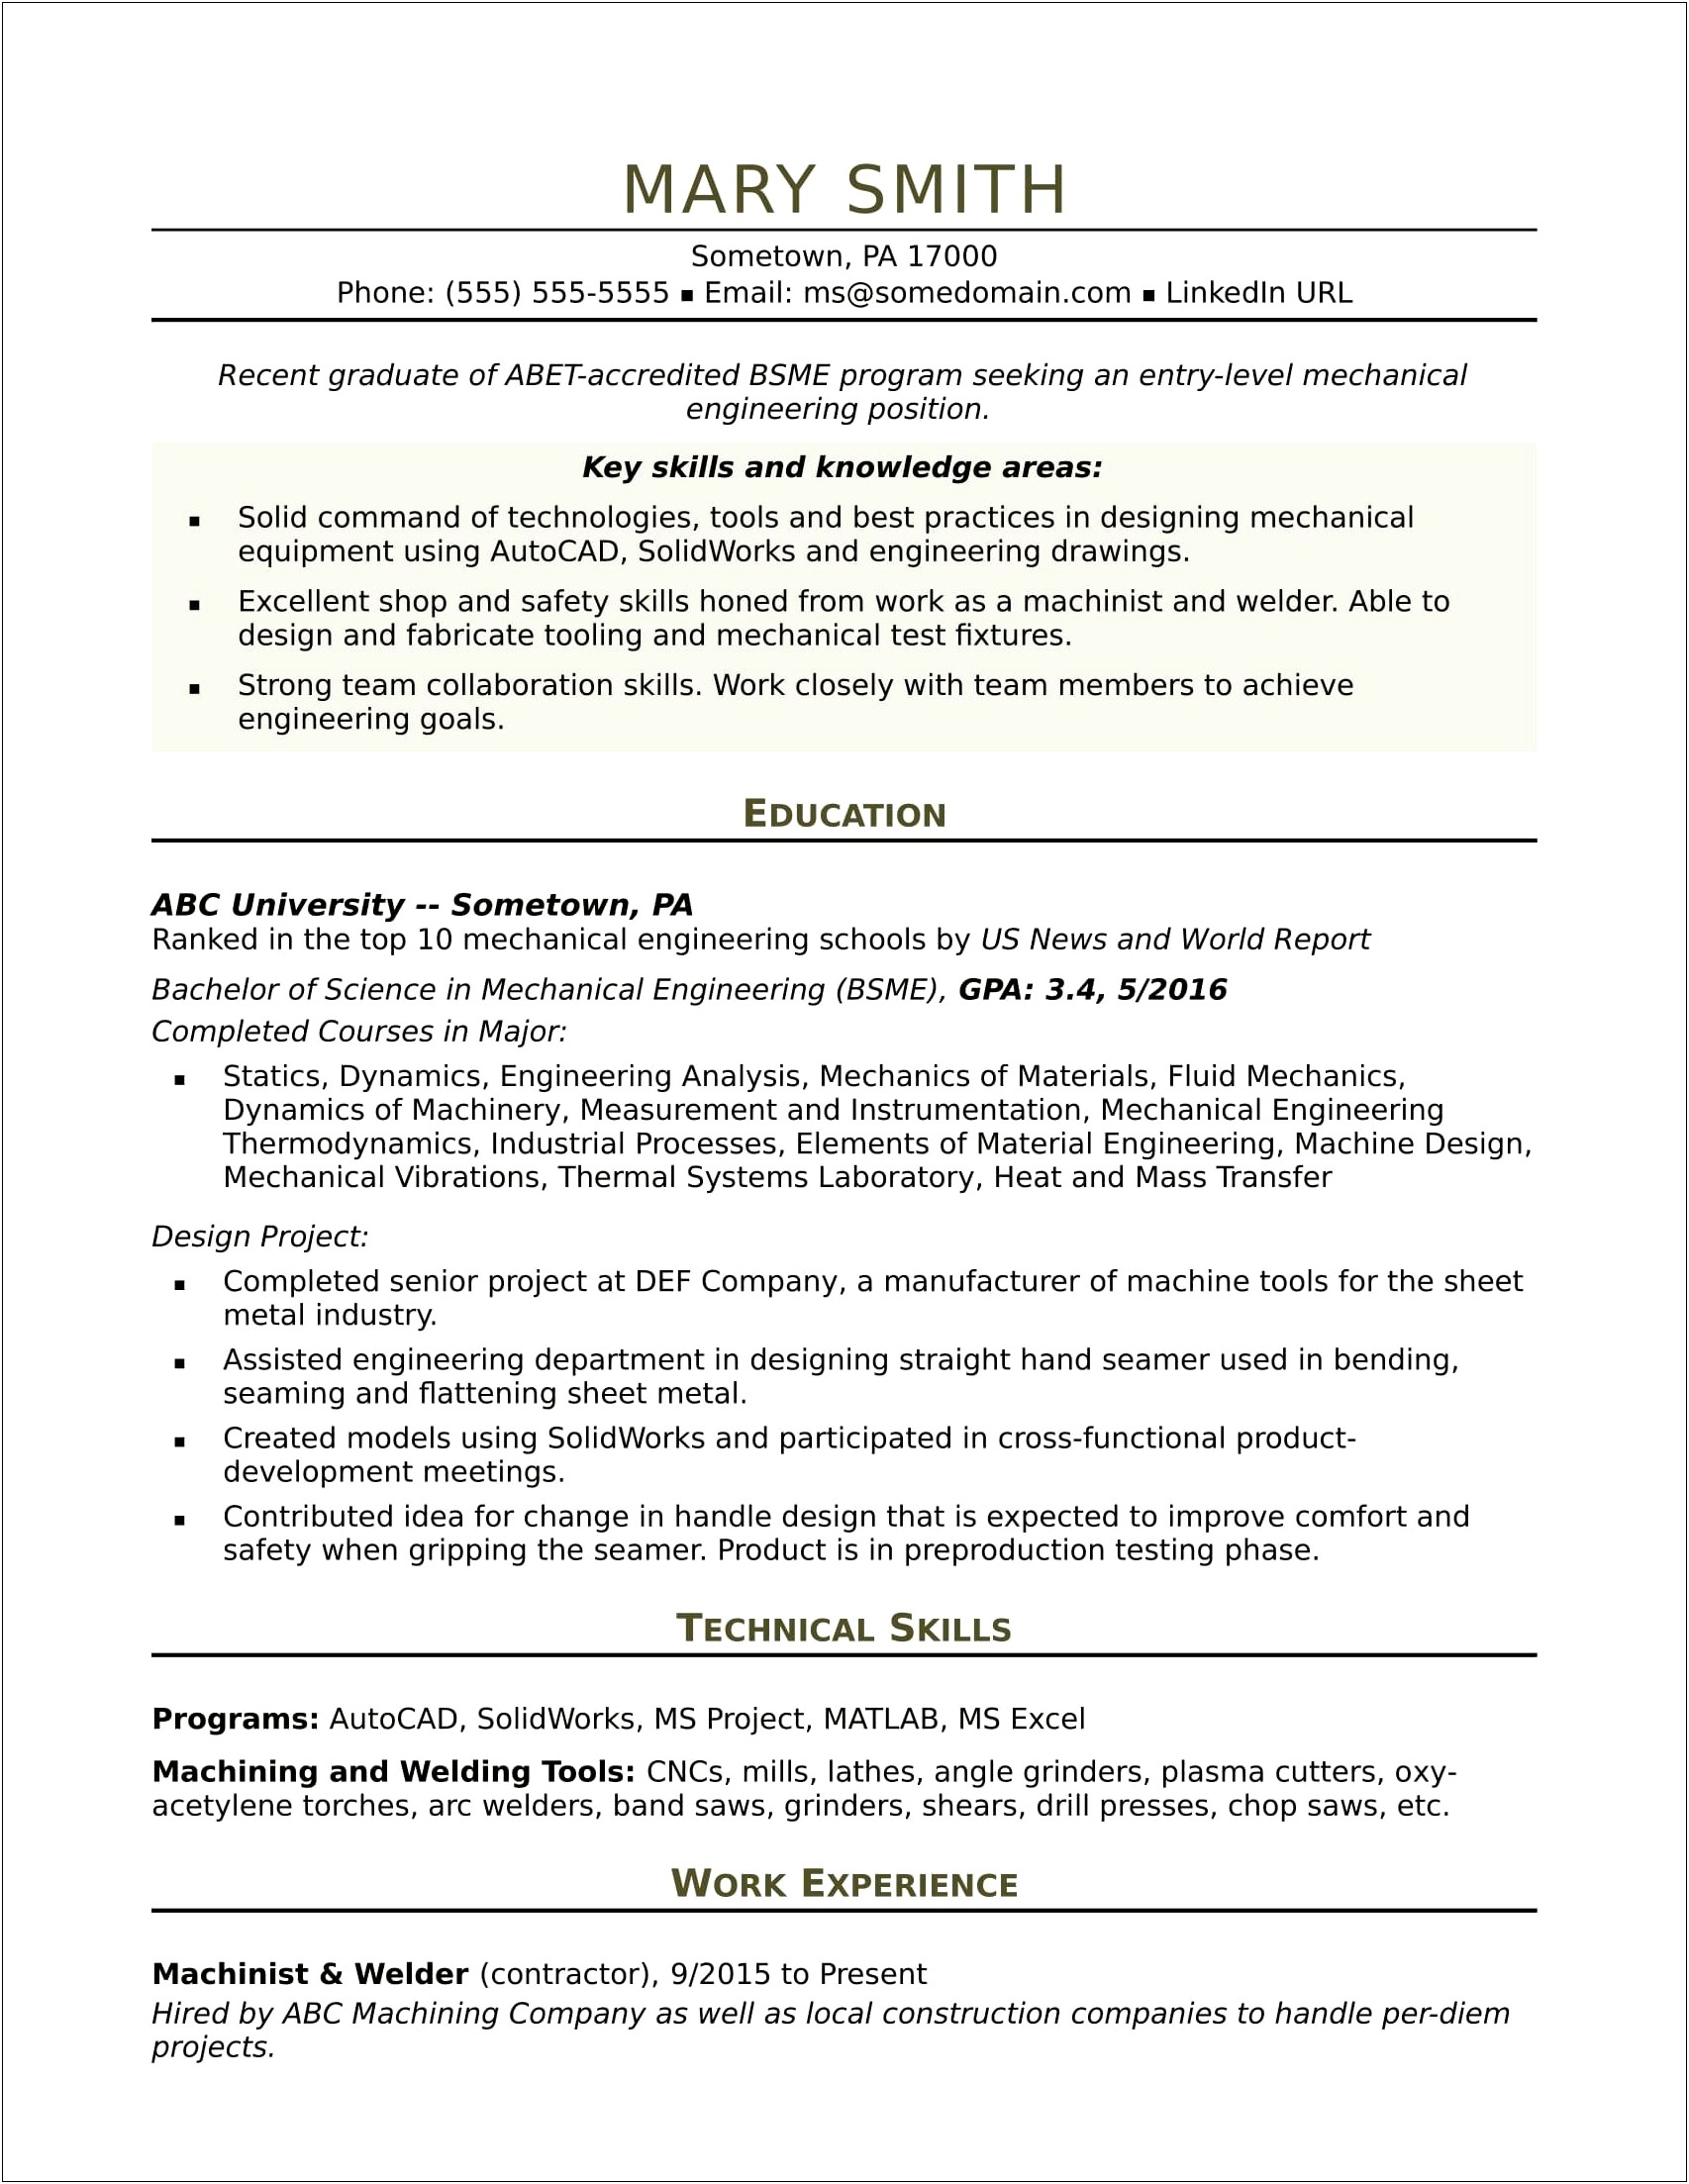 Stand Out Technical Skills For A Engineers Resume